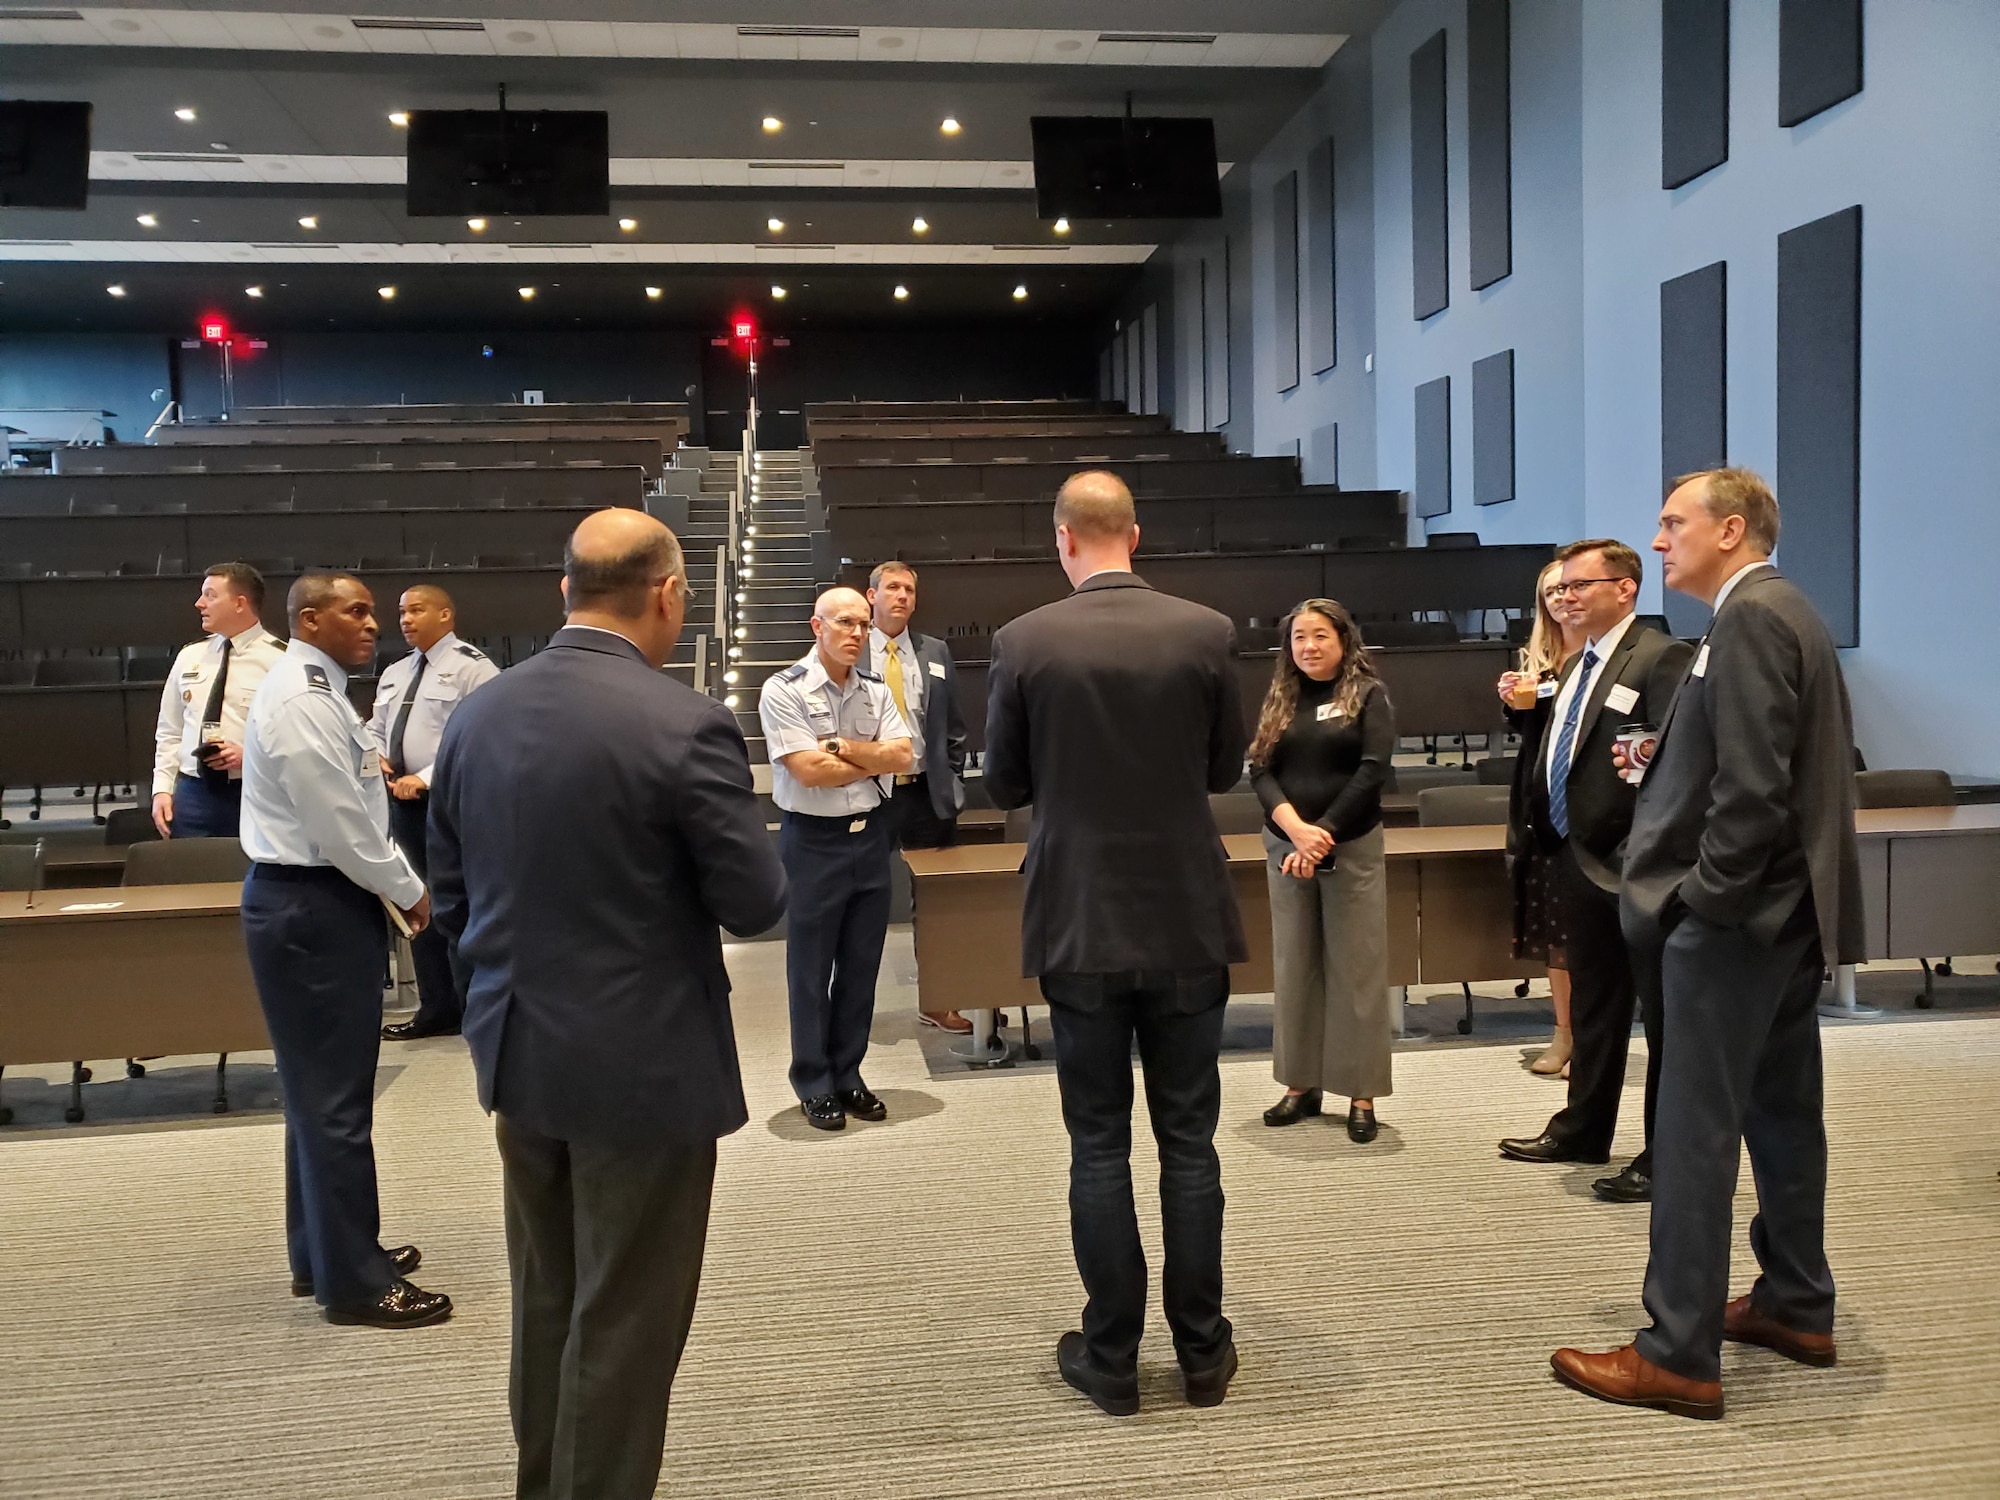 Georgia Cyber Center personnel brief Keesler personnel. (Courtesy photo)